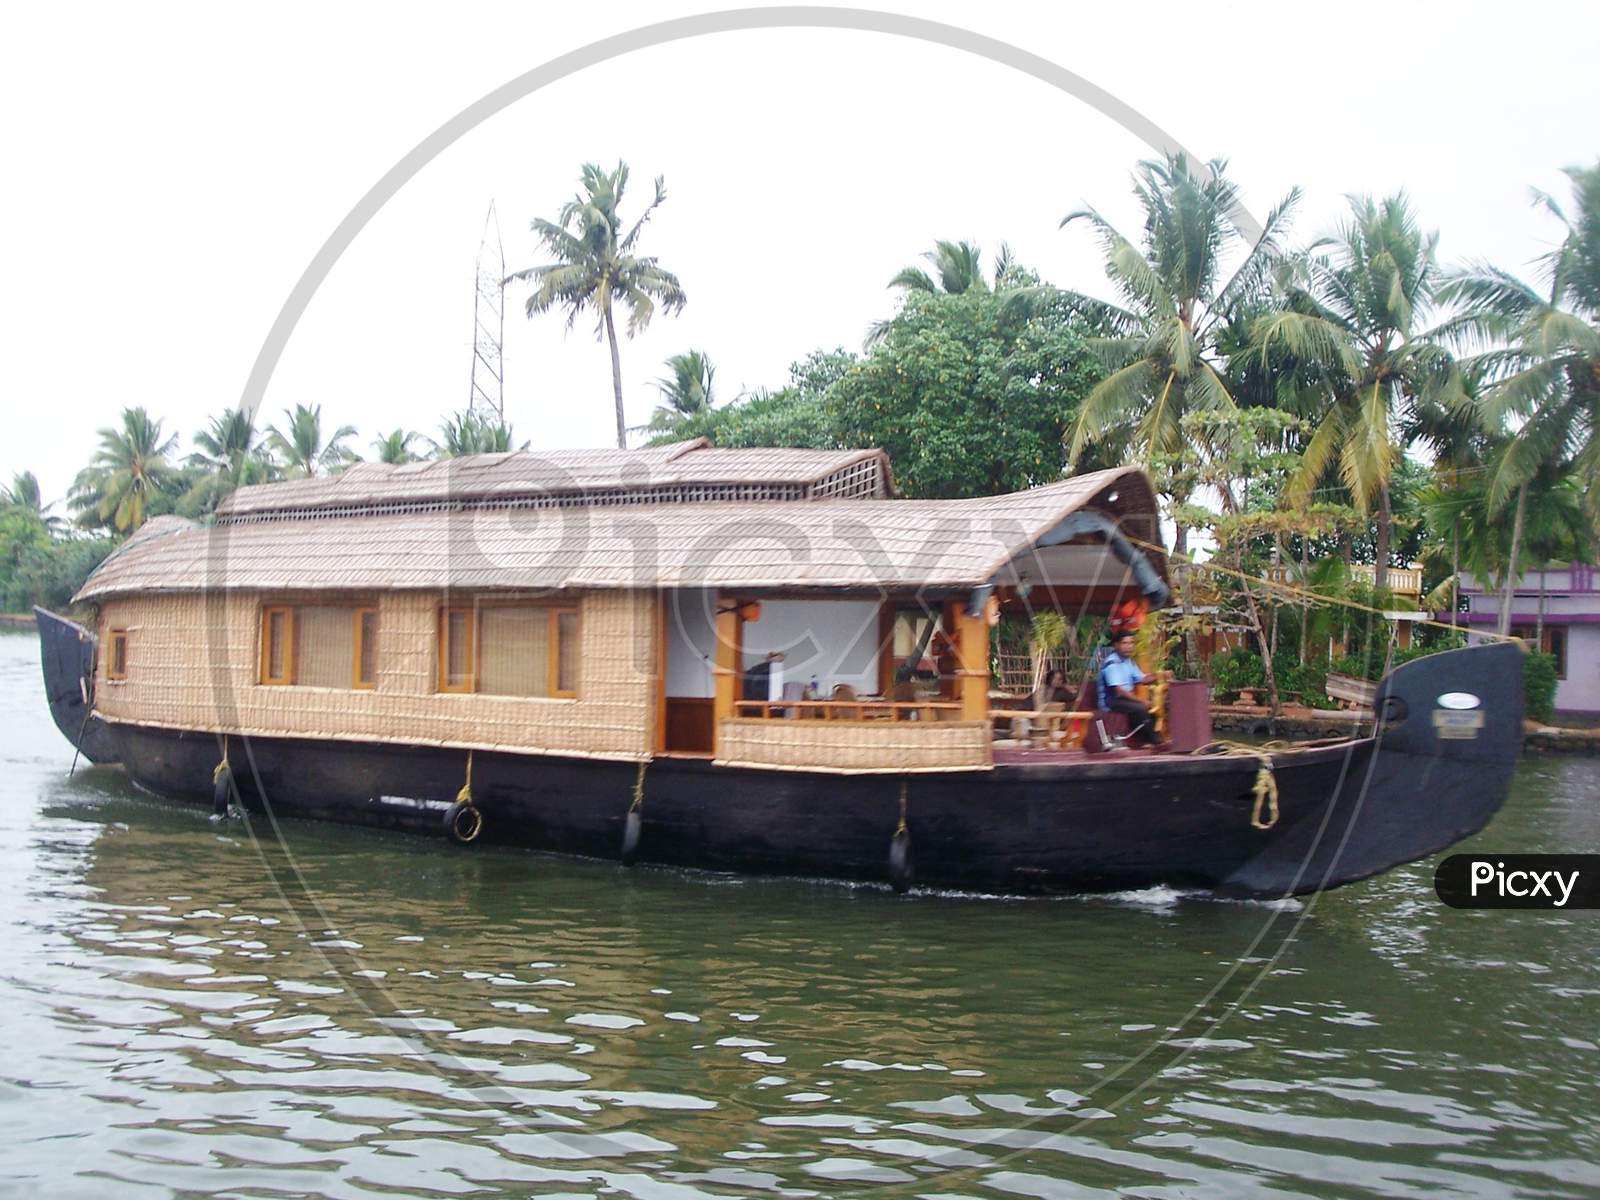 Houseboat in Backwaters at Alleppey, Kerala-Kerala Tourism